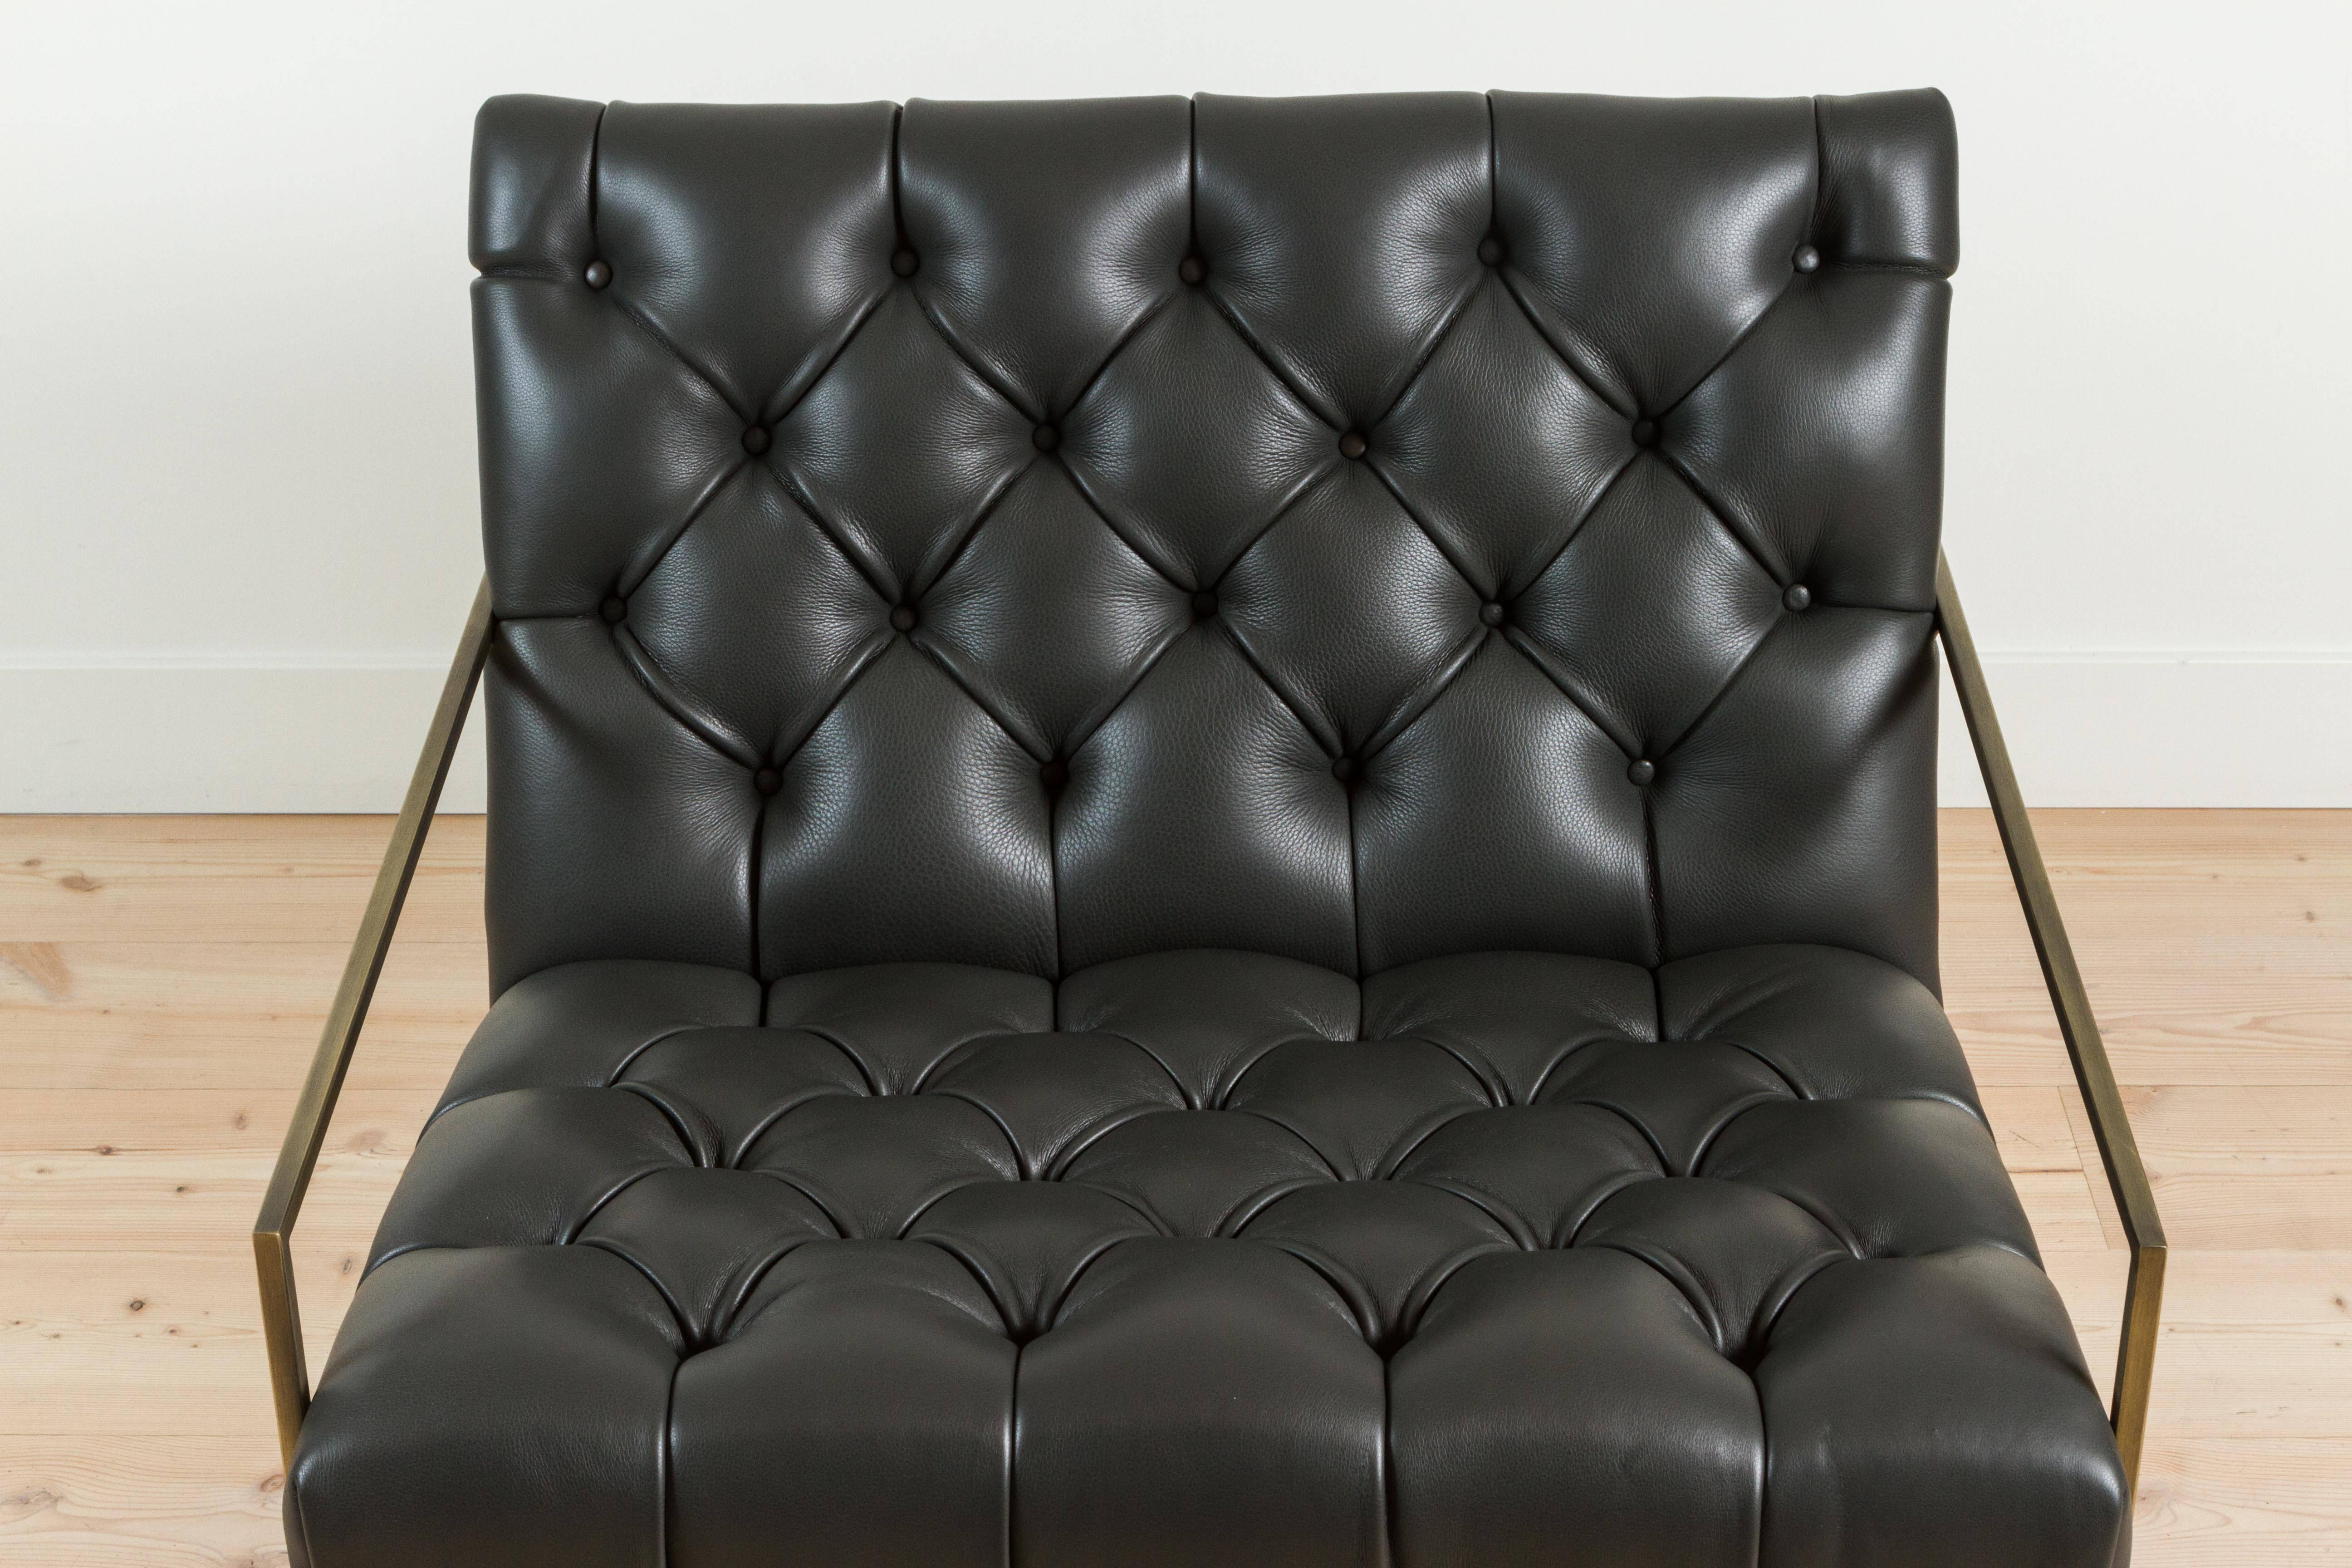 Thin Frame Lounge Chair in Diamond Tufted Charcoal Leather by Lawson-Fenning 1